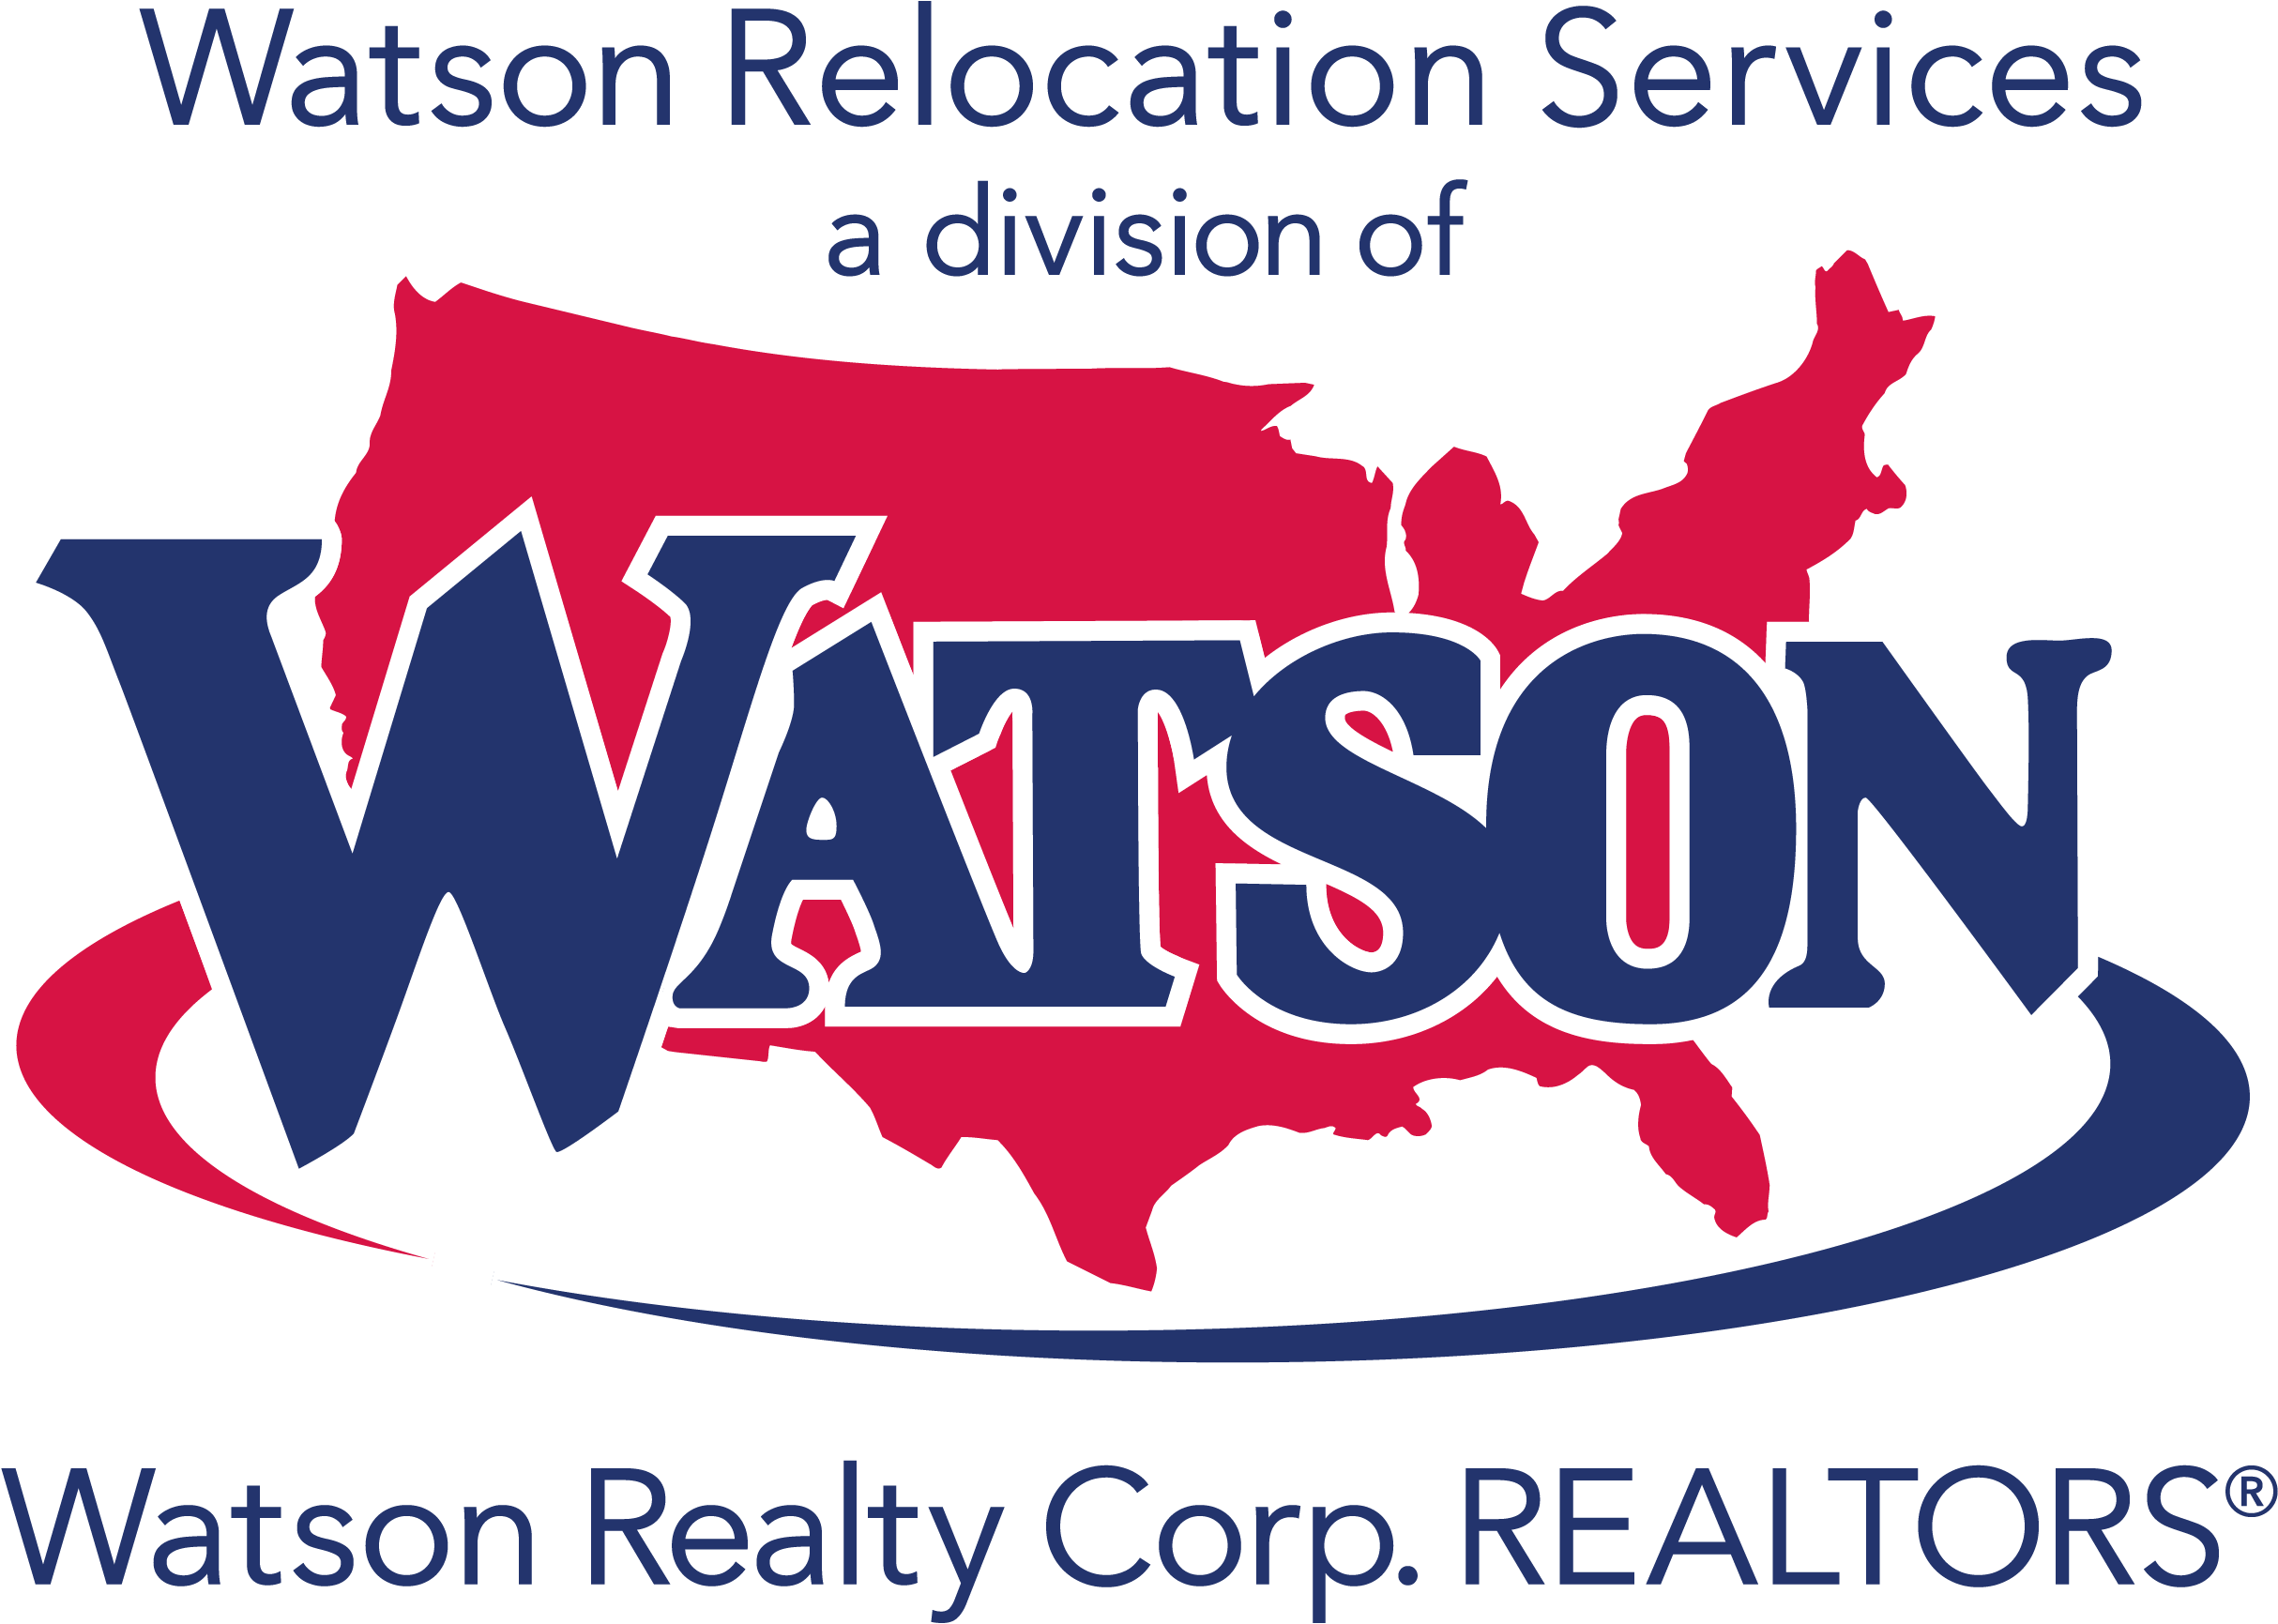 Watson Relocation Services